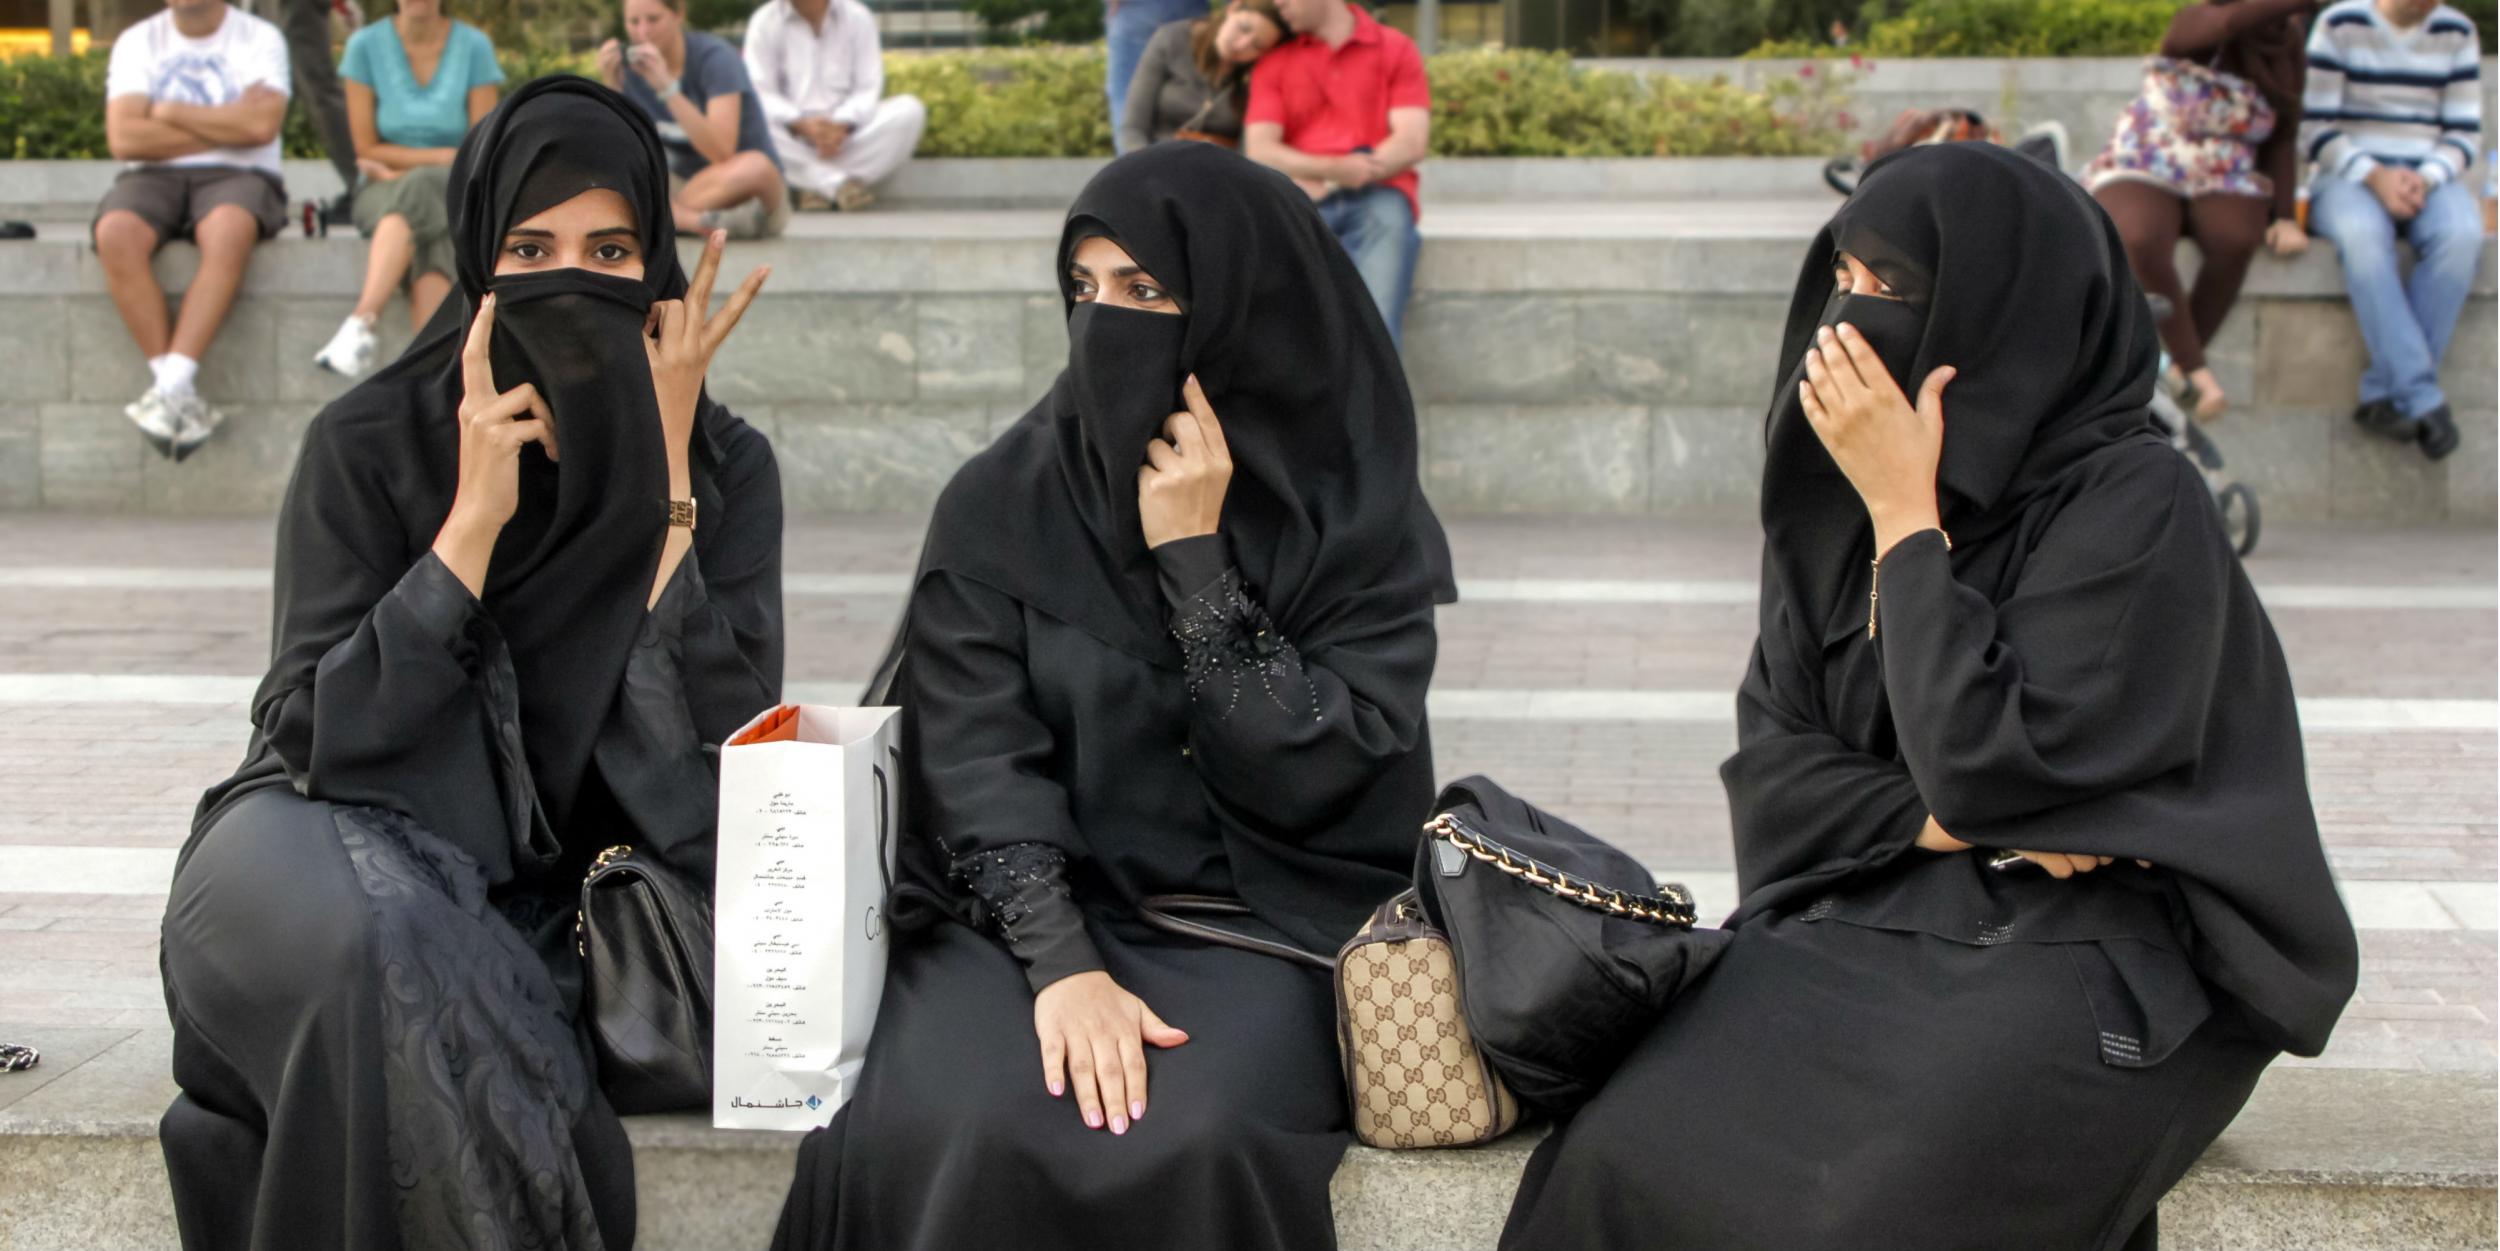 Colombo Government to ban the burqa and shut Islamic schools: Sri Lankan Minister says